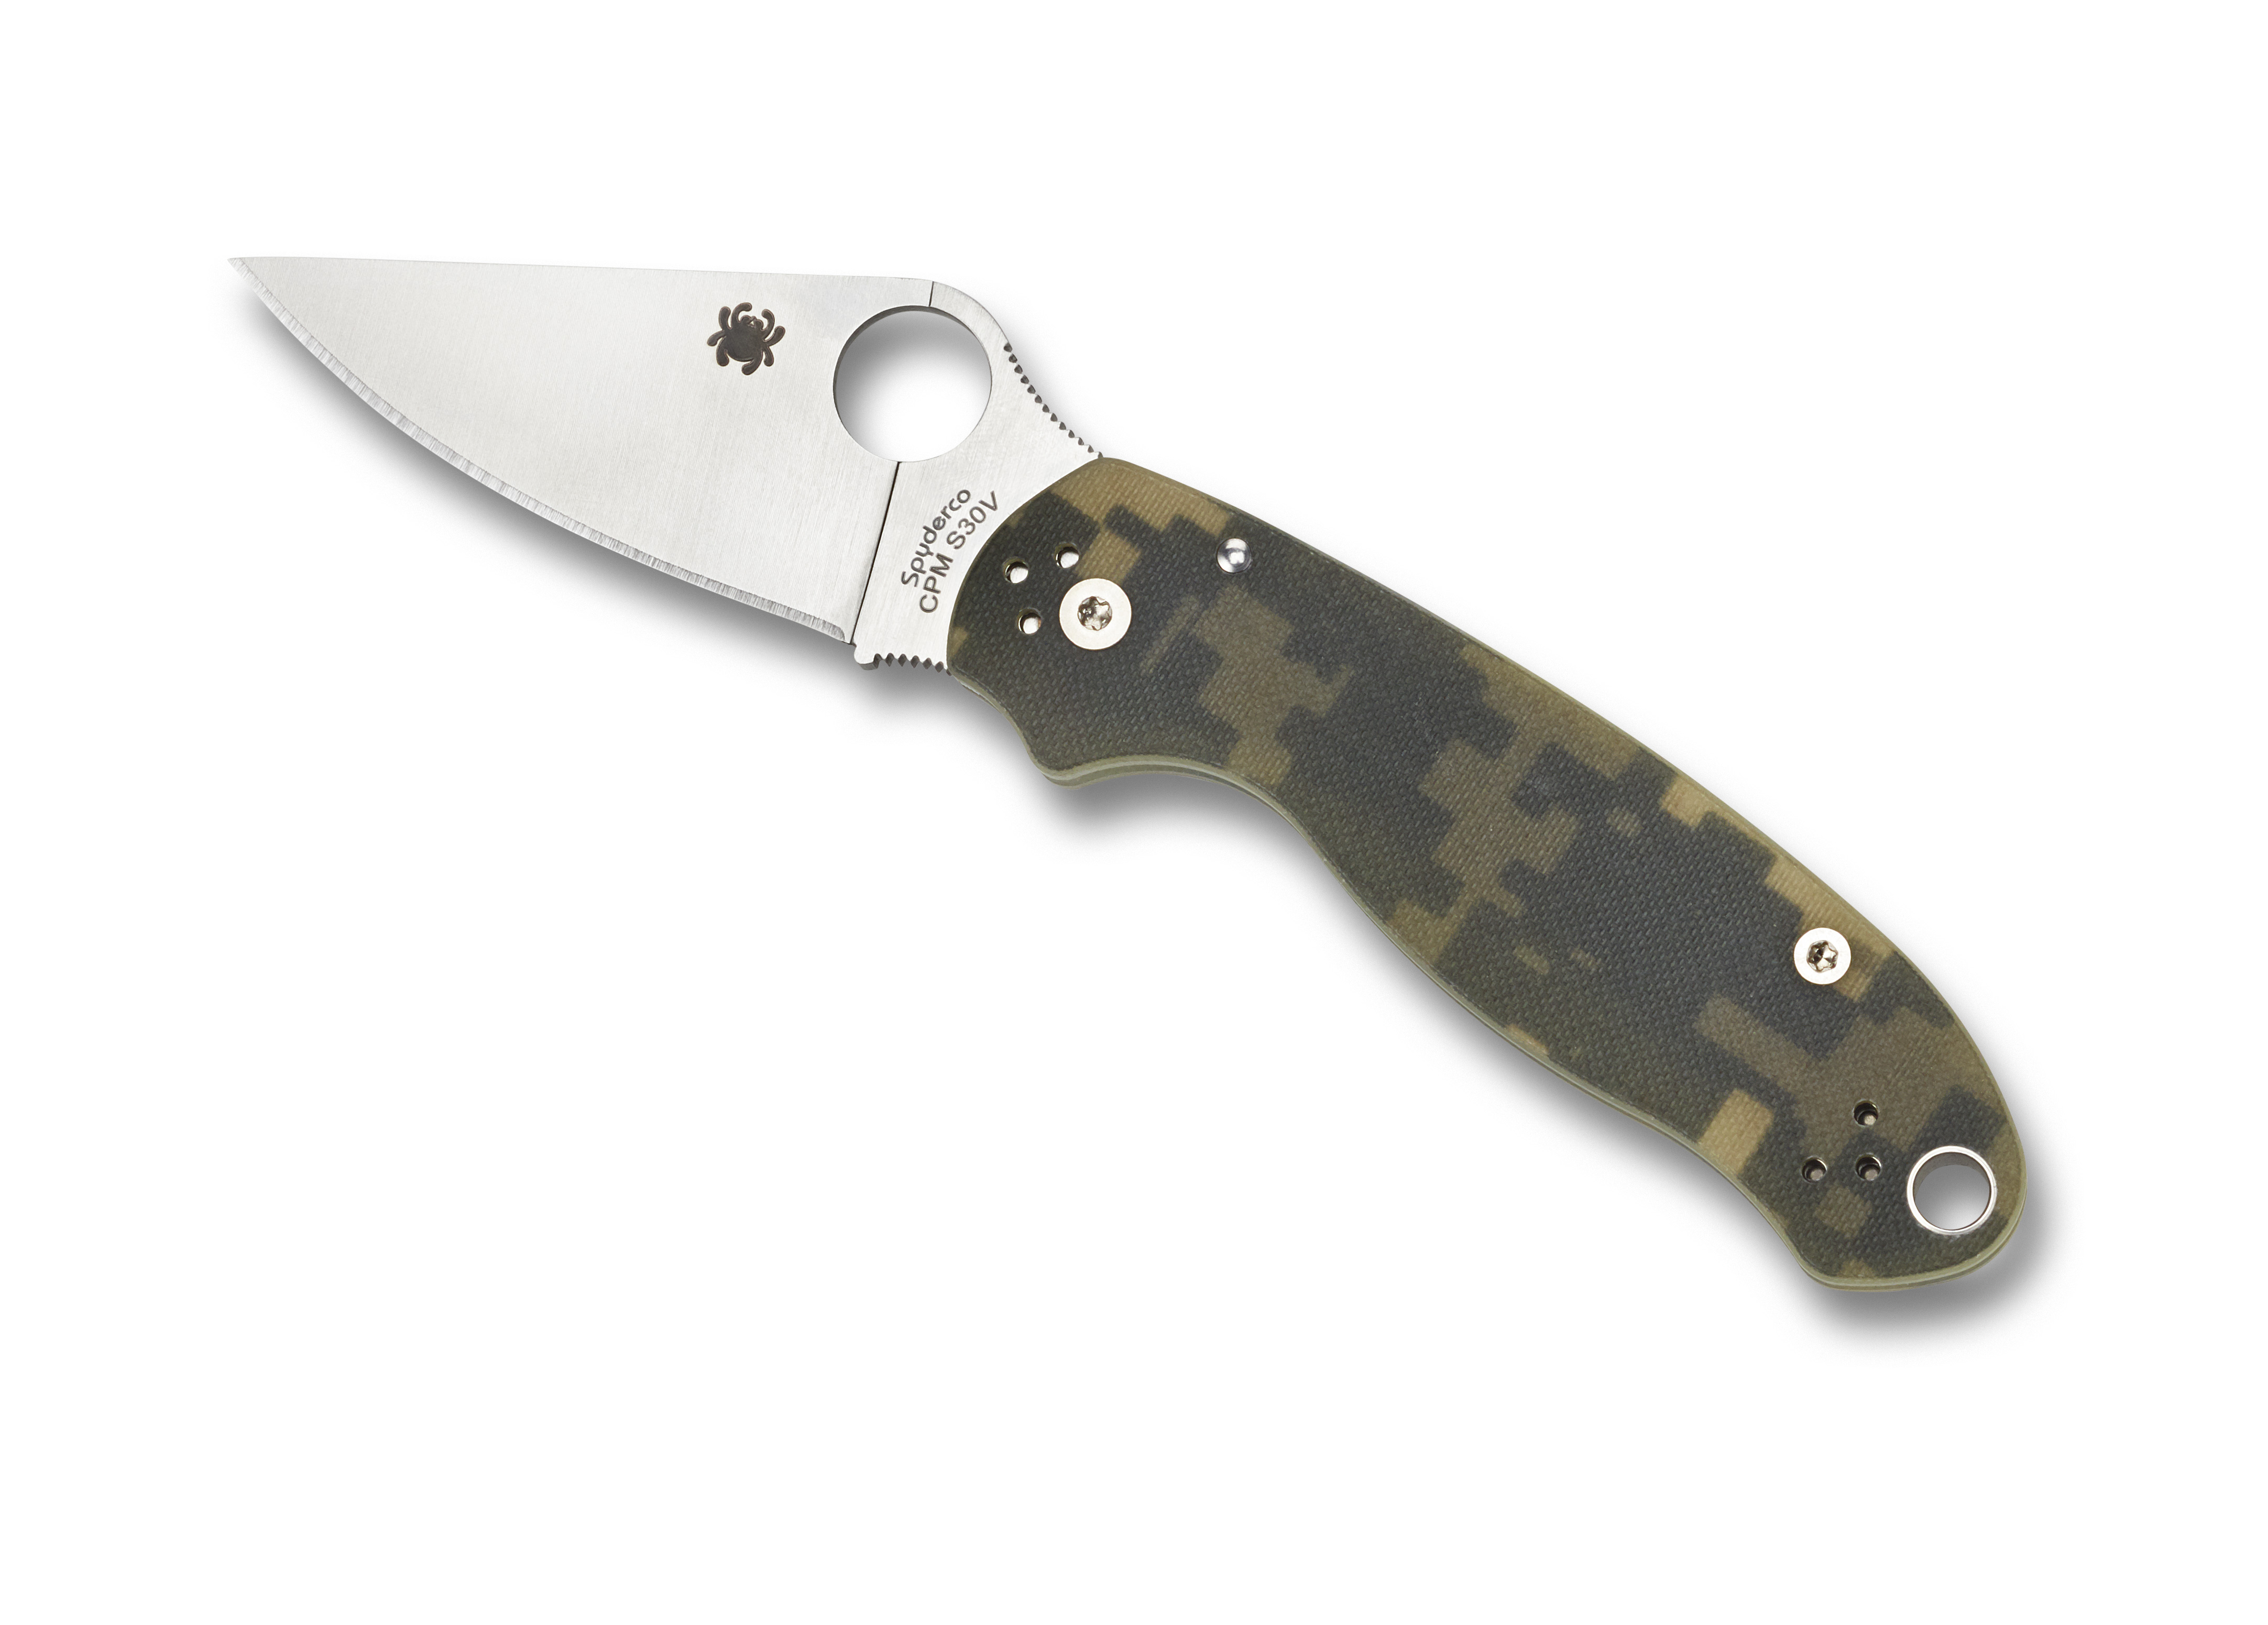 Spyderco Para 3 Folding Knife | Up to 30% Off 4.8 Star Rating w